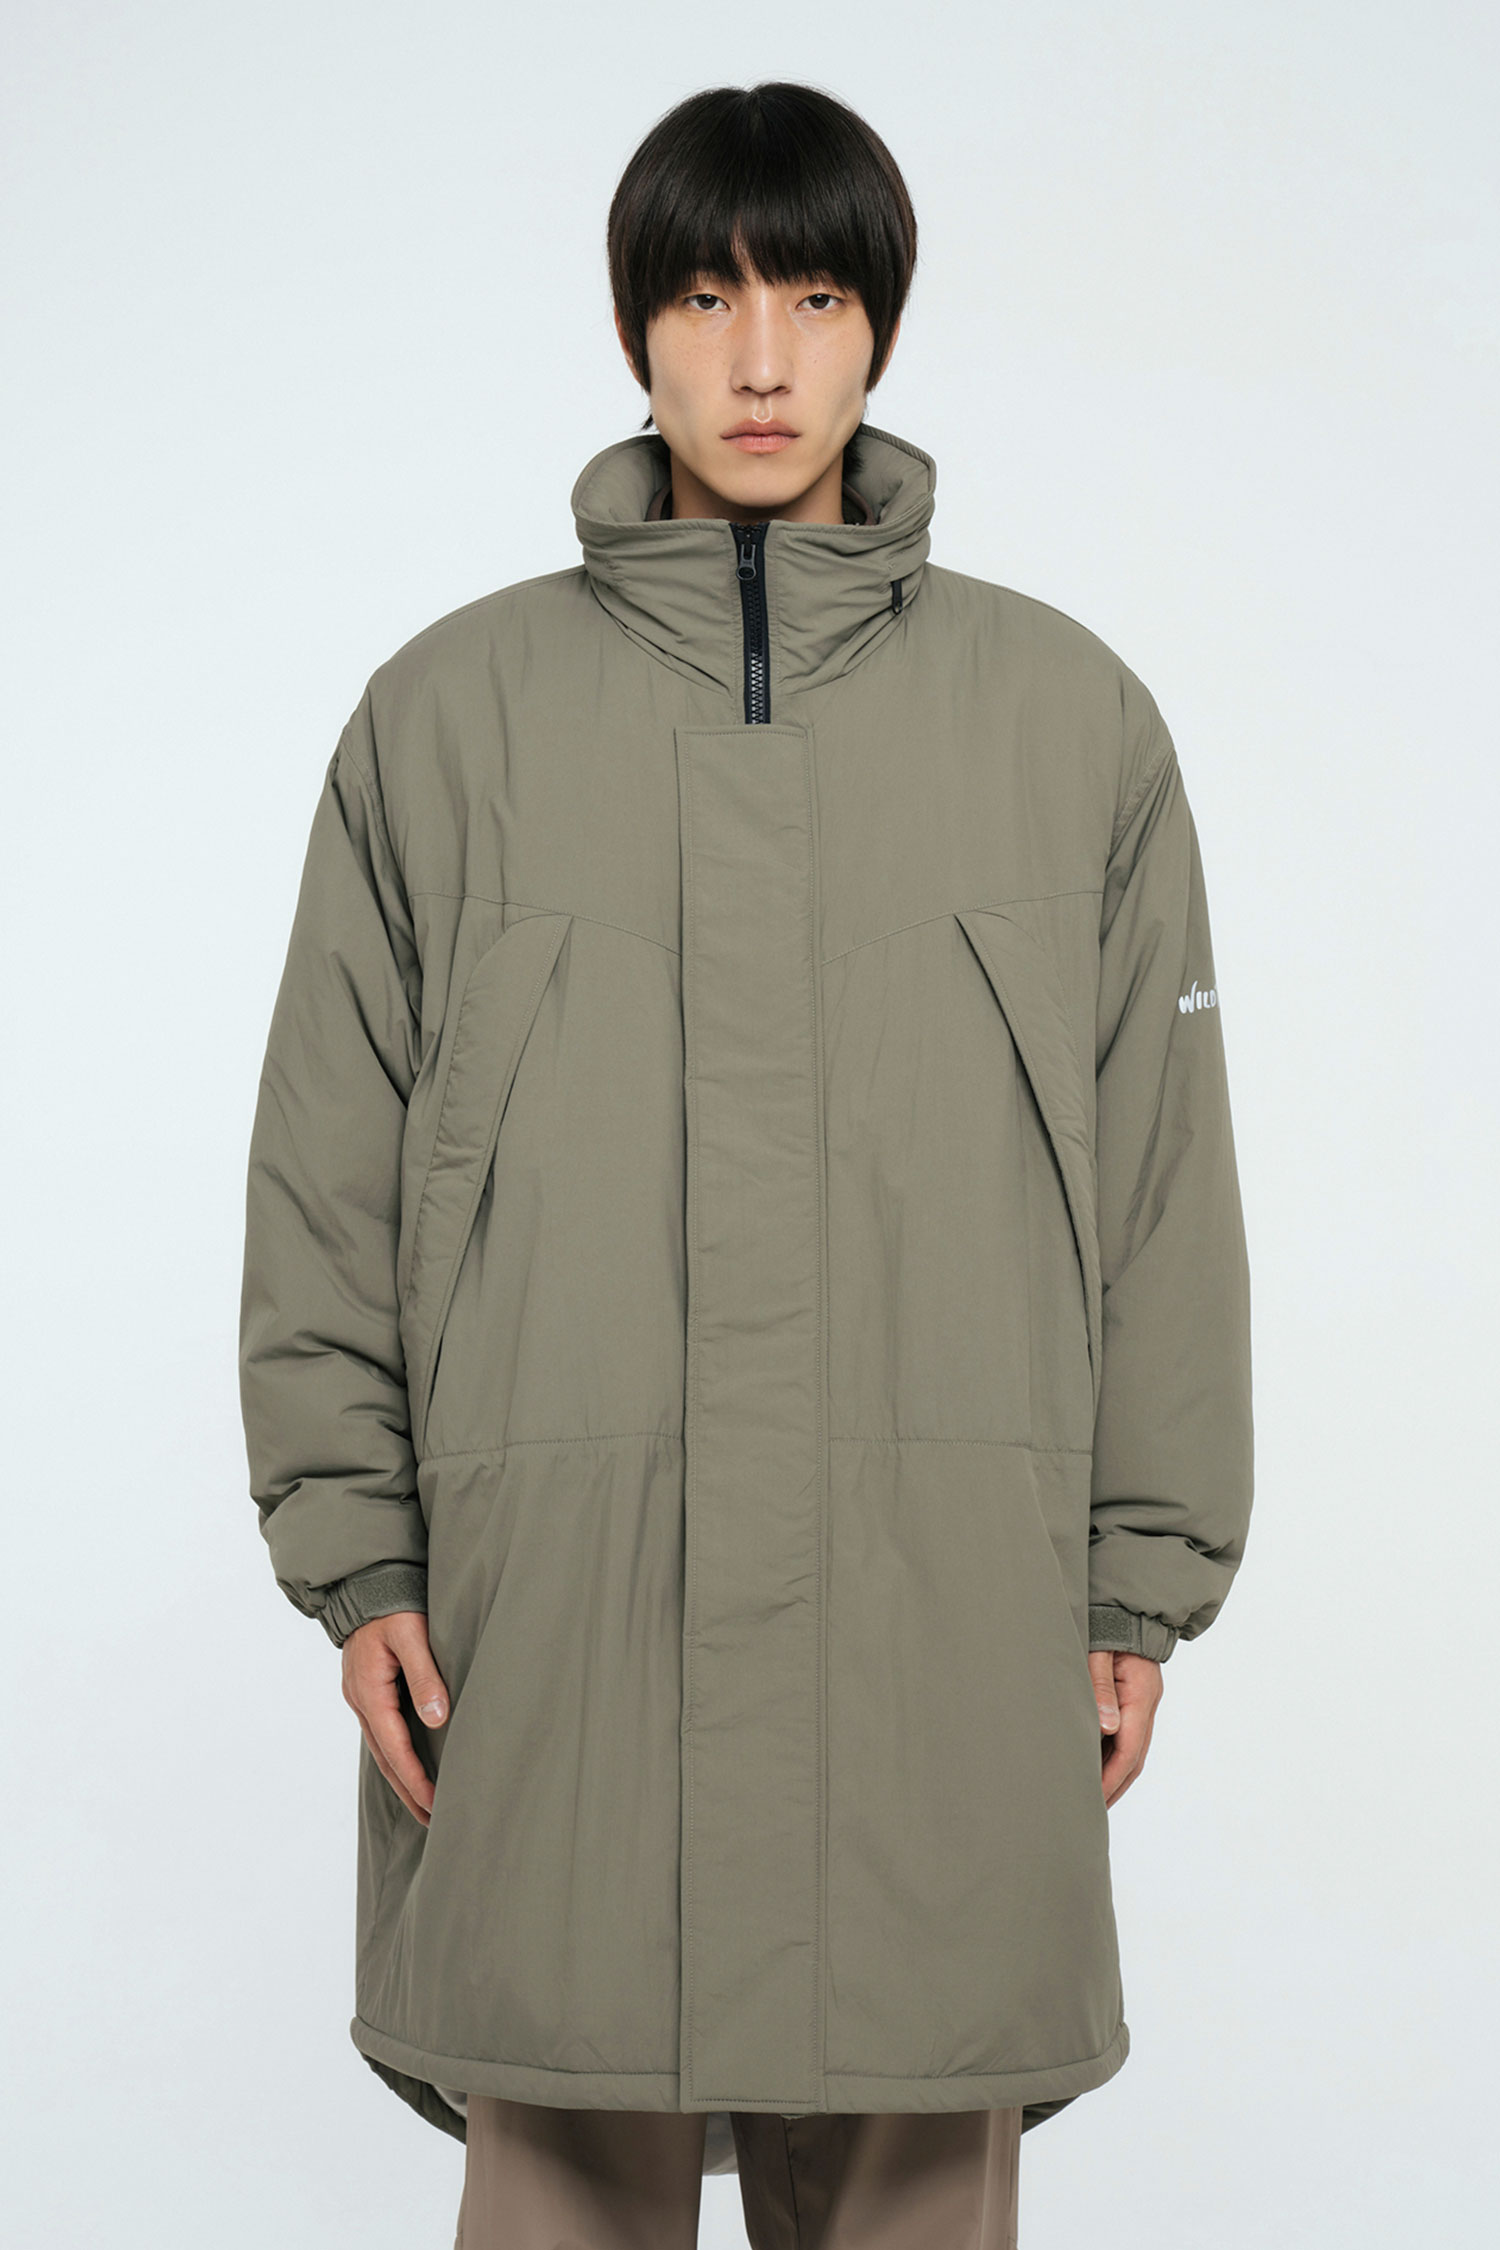 WIND AND SEA WILDTHINGS WDS Ready Parka-